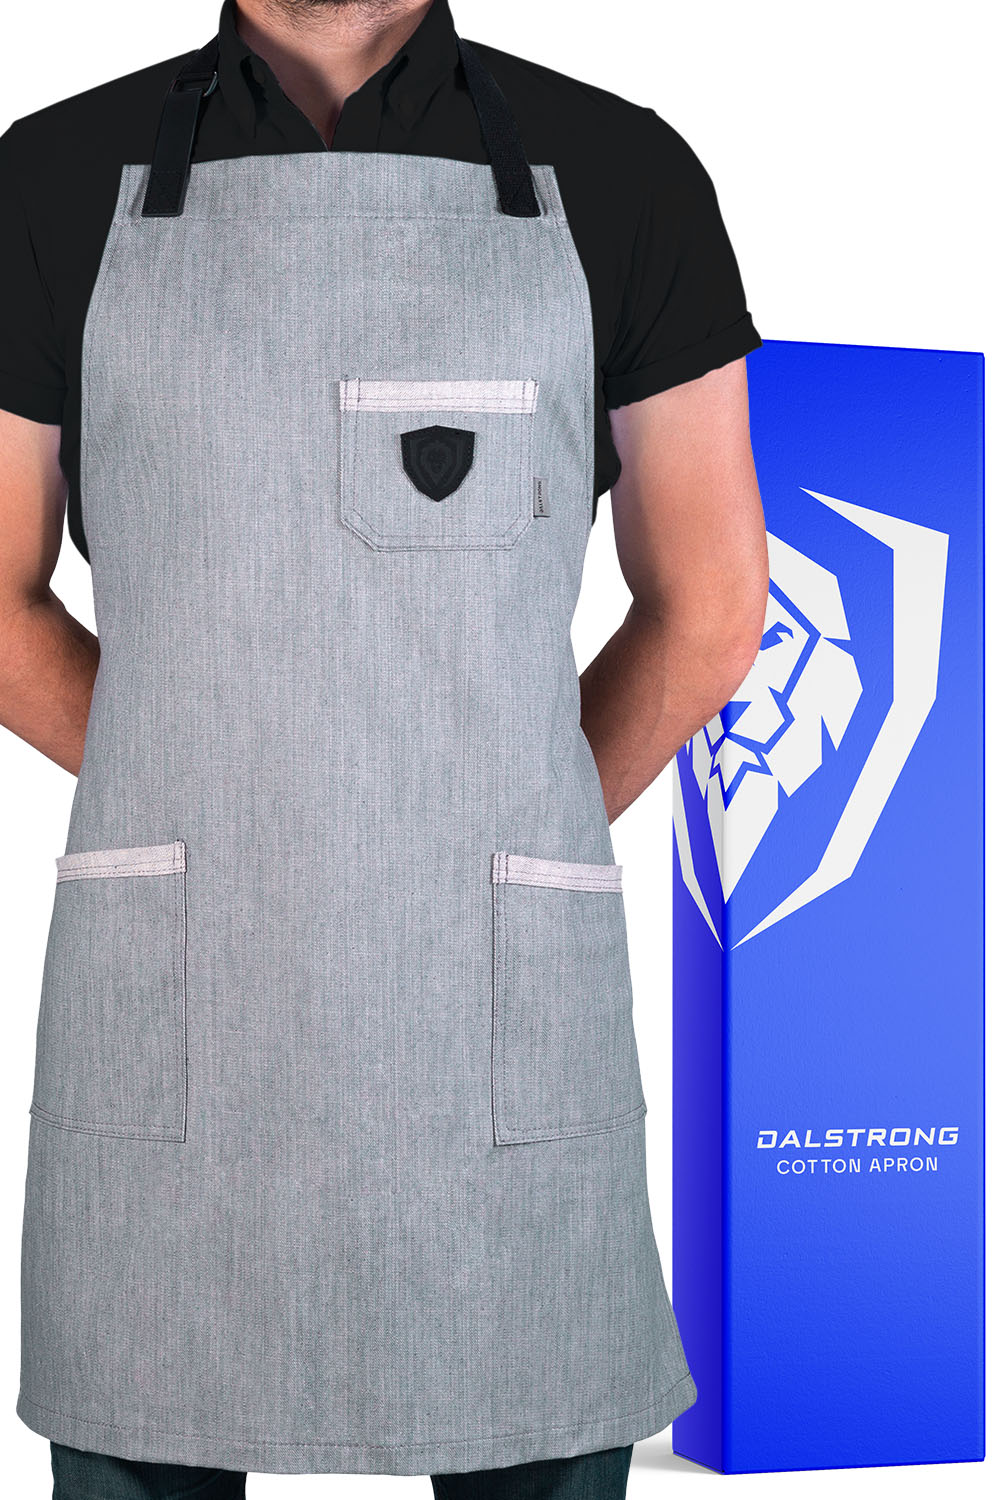 Dalstrong the gandalf professional chef's kitchen apron in front of it's prremium packaging.